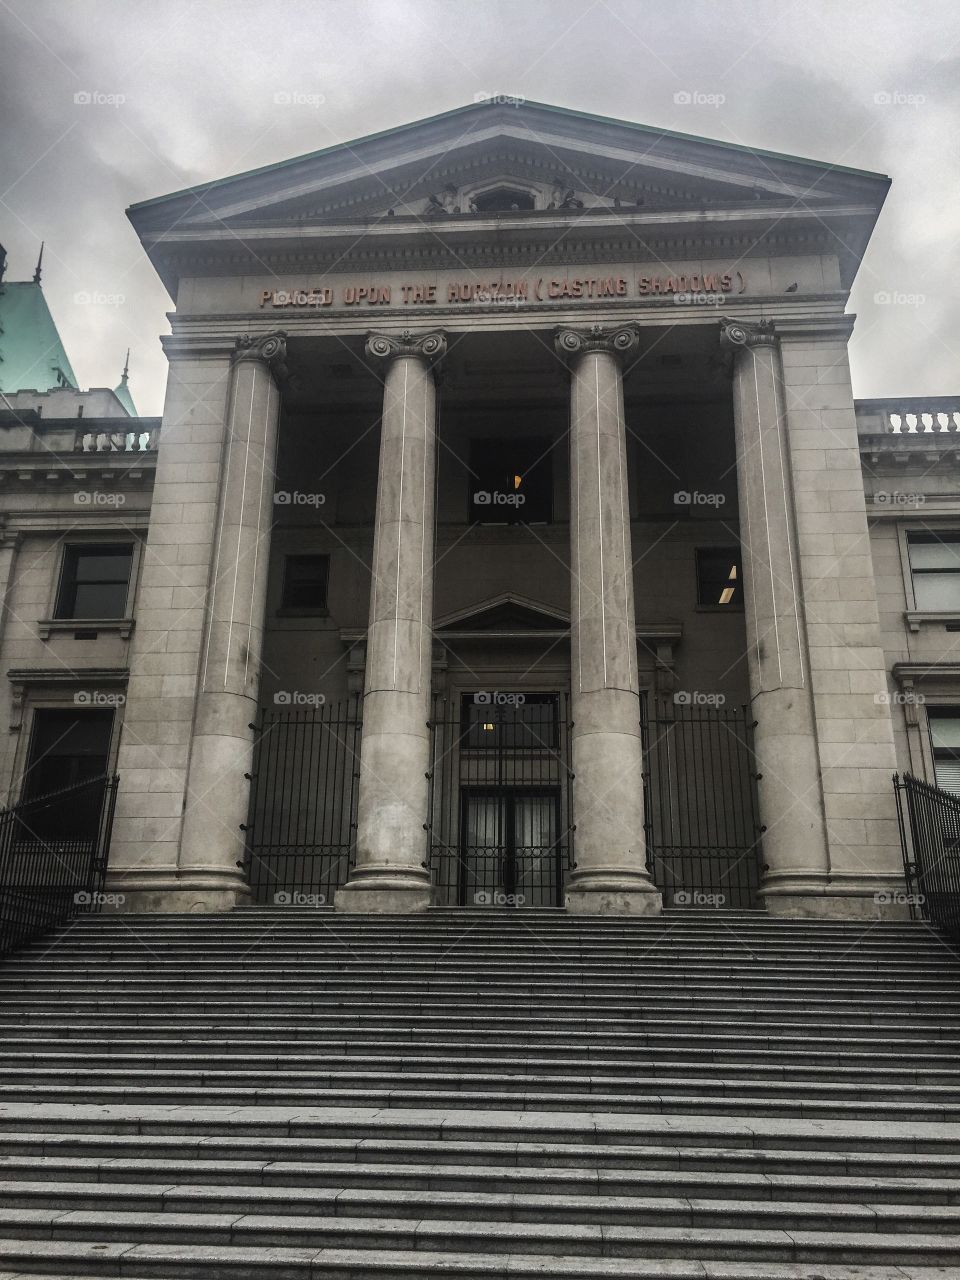 Vancouver Art Gallery on a cloudy autumn day in Vancouver, British Columbia 